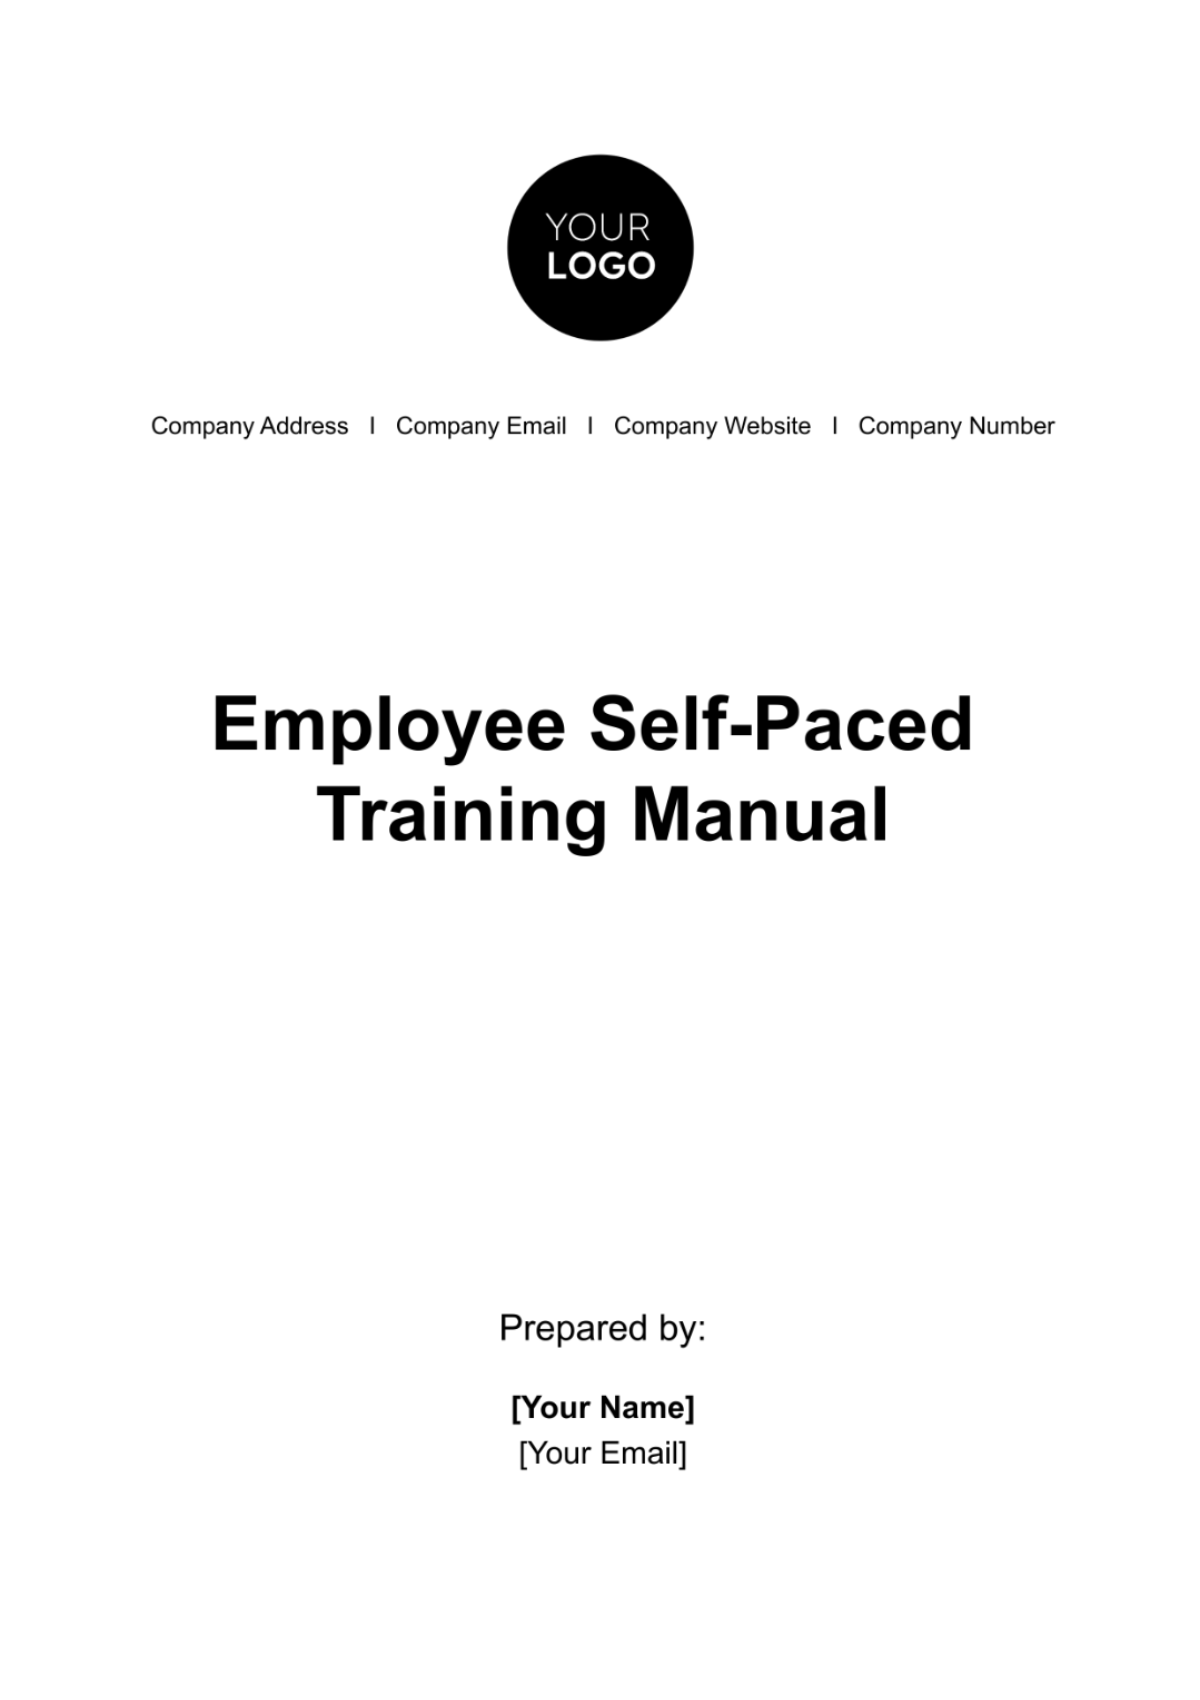 Employee Self-paced Training Manual HR Template